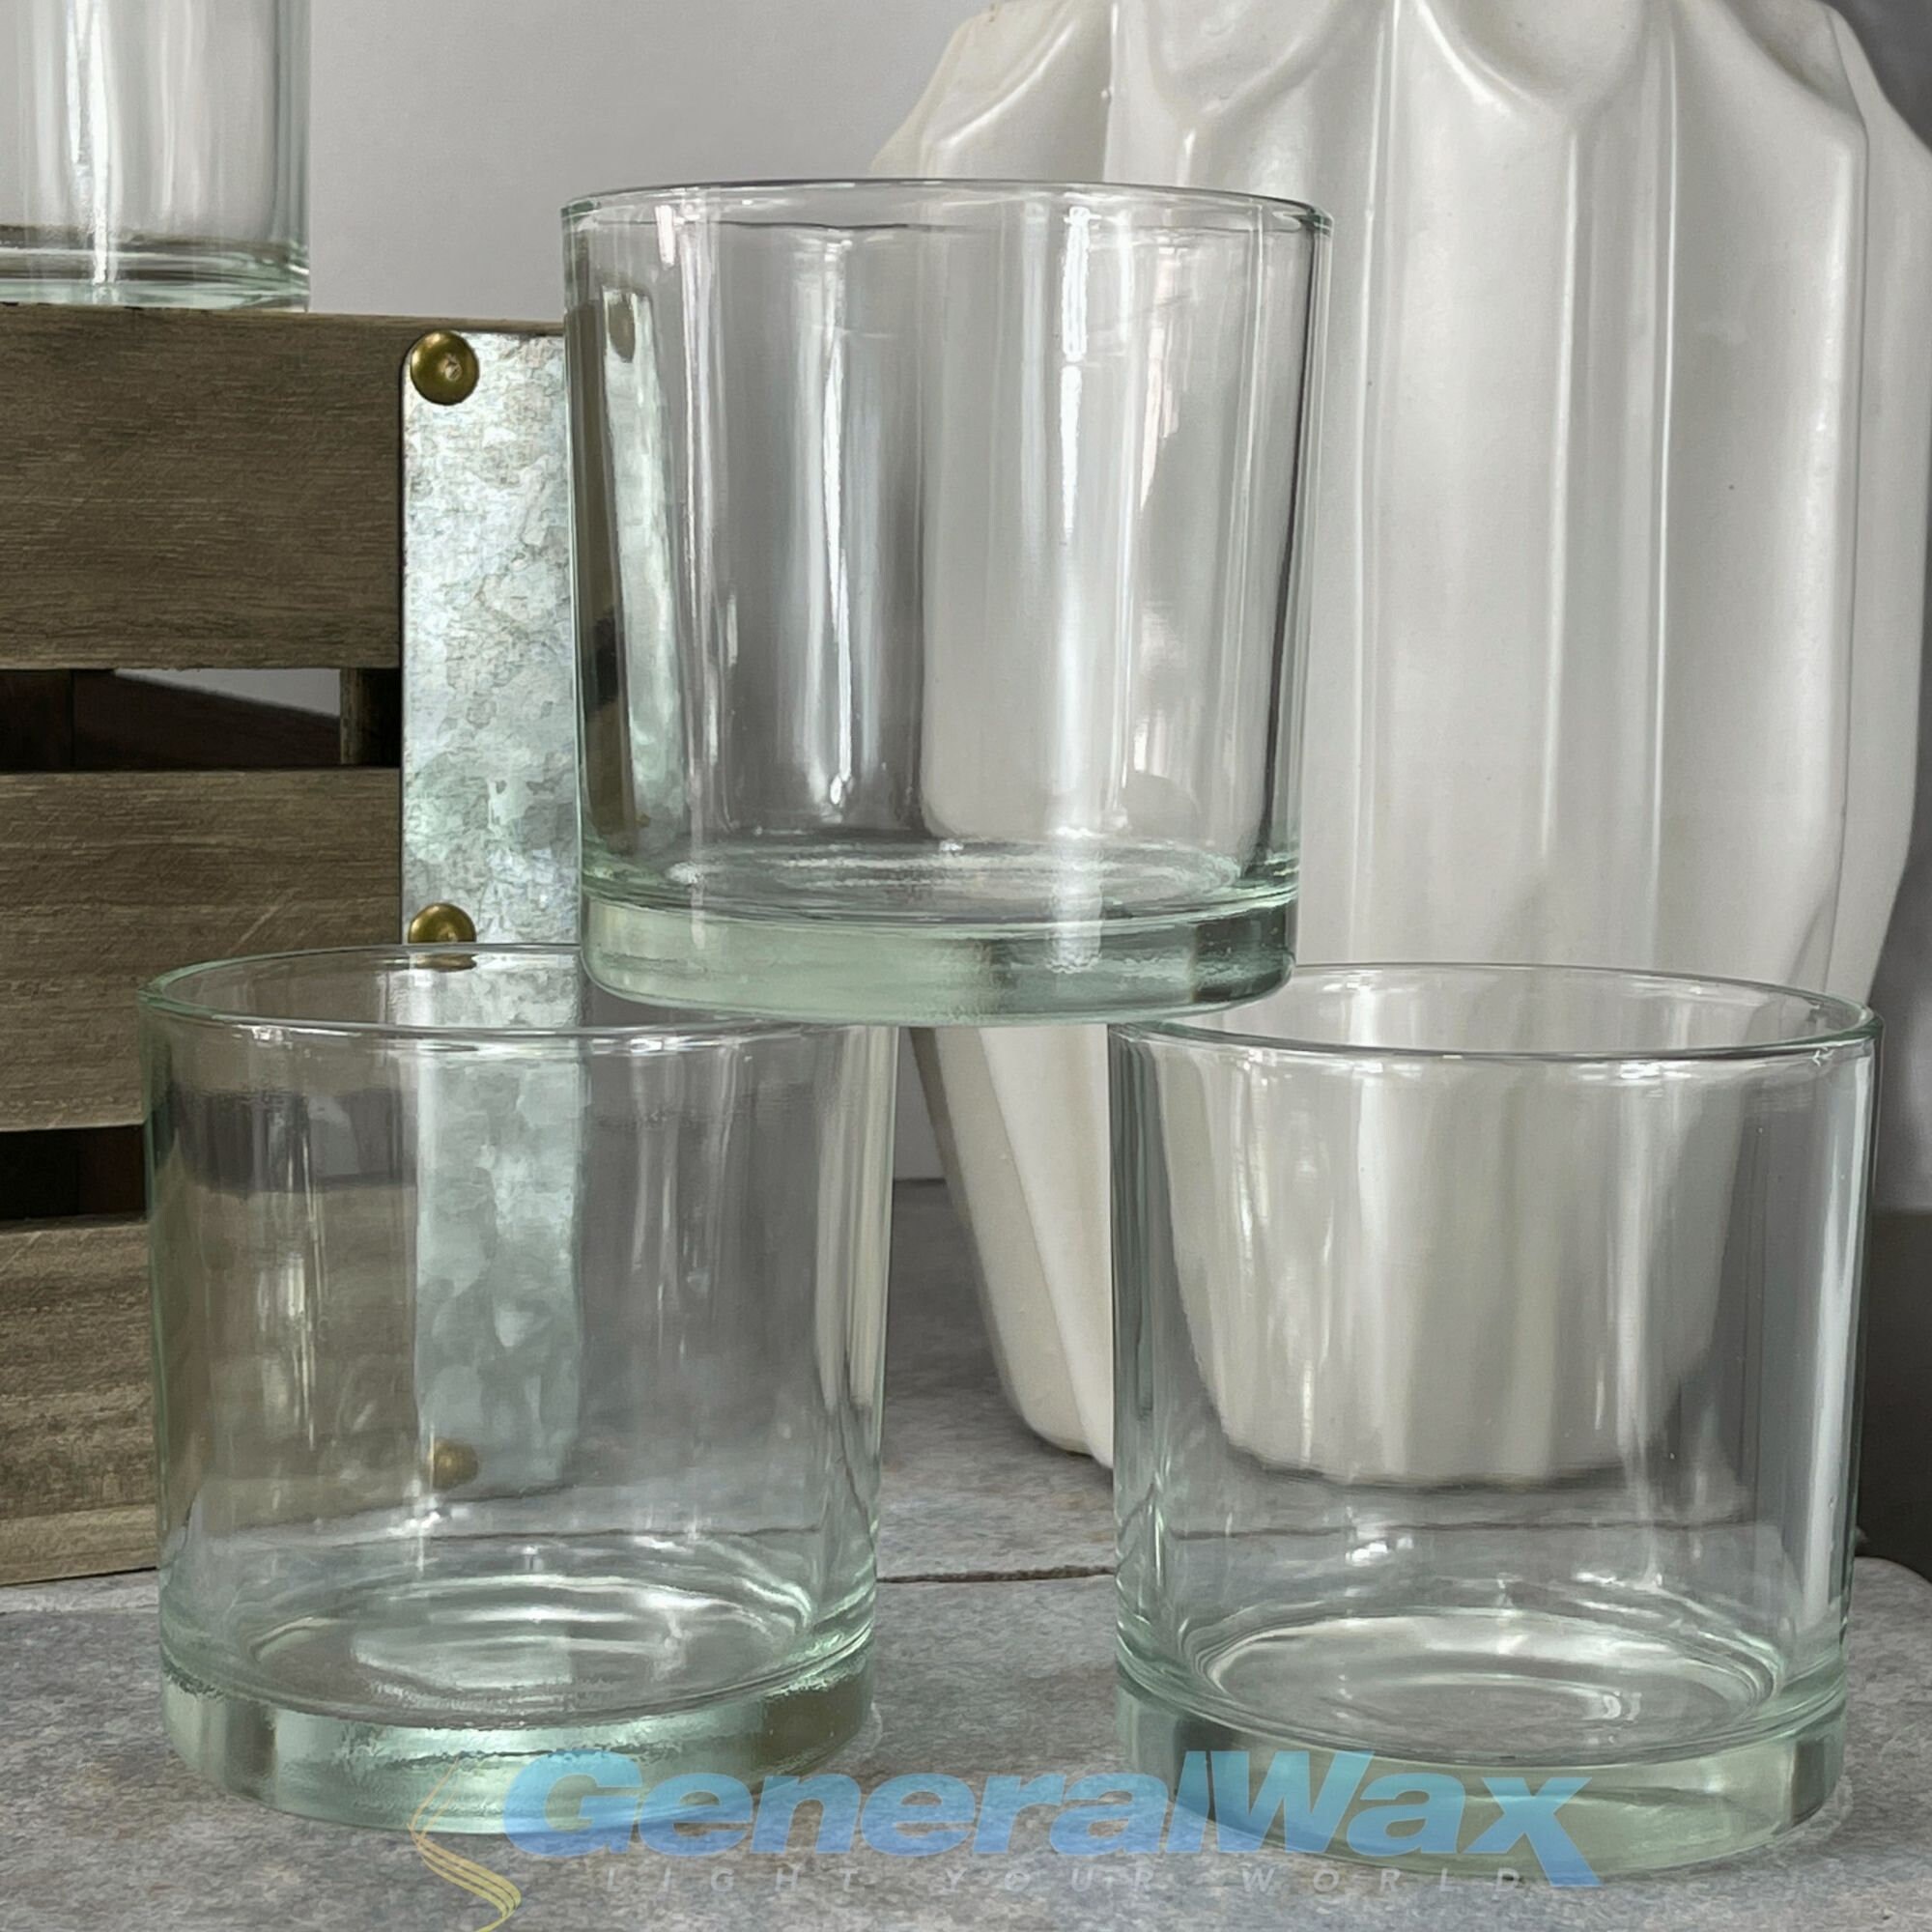 MONTICIANO CLEAR CANDLE VESSEL